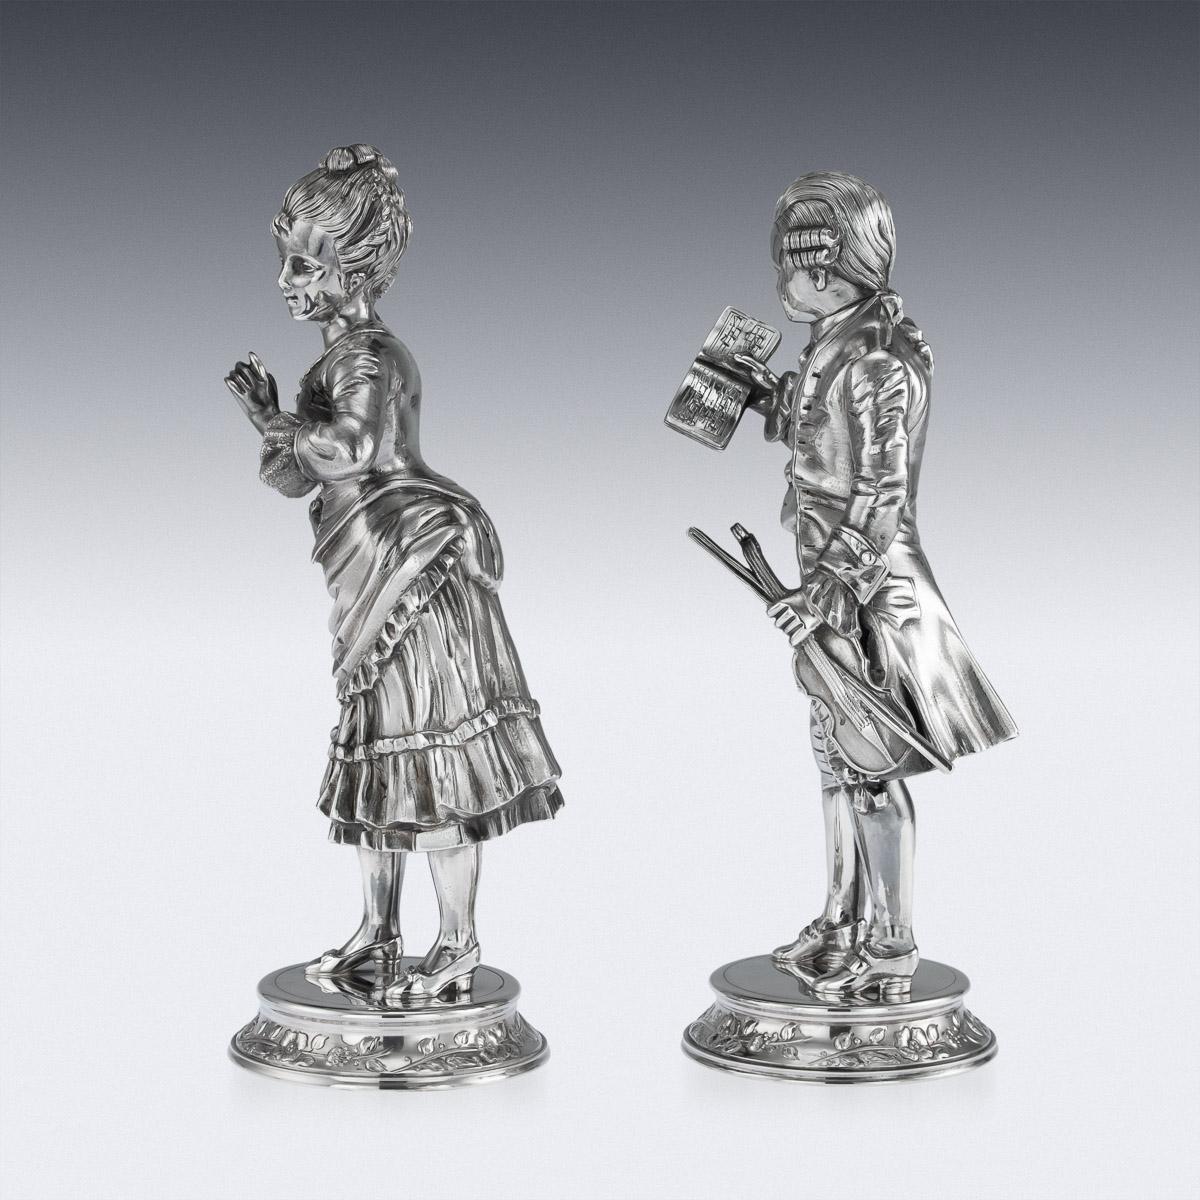 Impressive 20th century pair of novelty solid silver figures of a man and woman in 18th century costume, the man modelled holding a violin and book, the woman elegantly posing with a flower in hand. Both hallmarked on the base 925 (925 silver